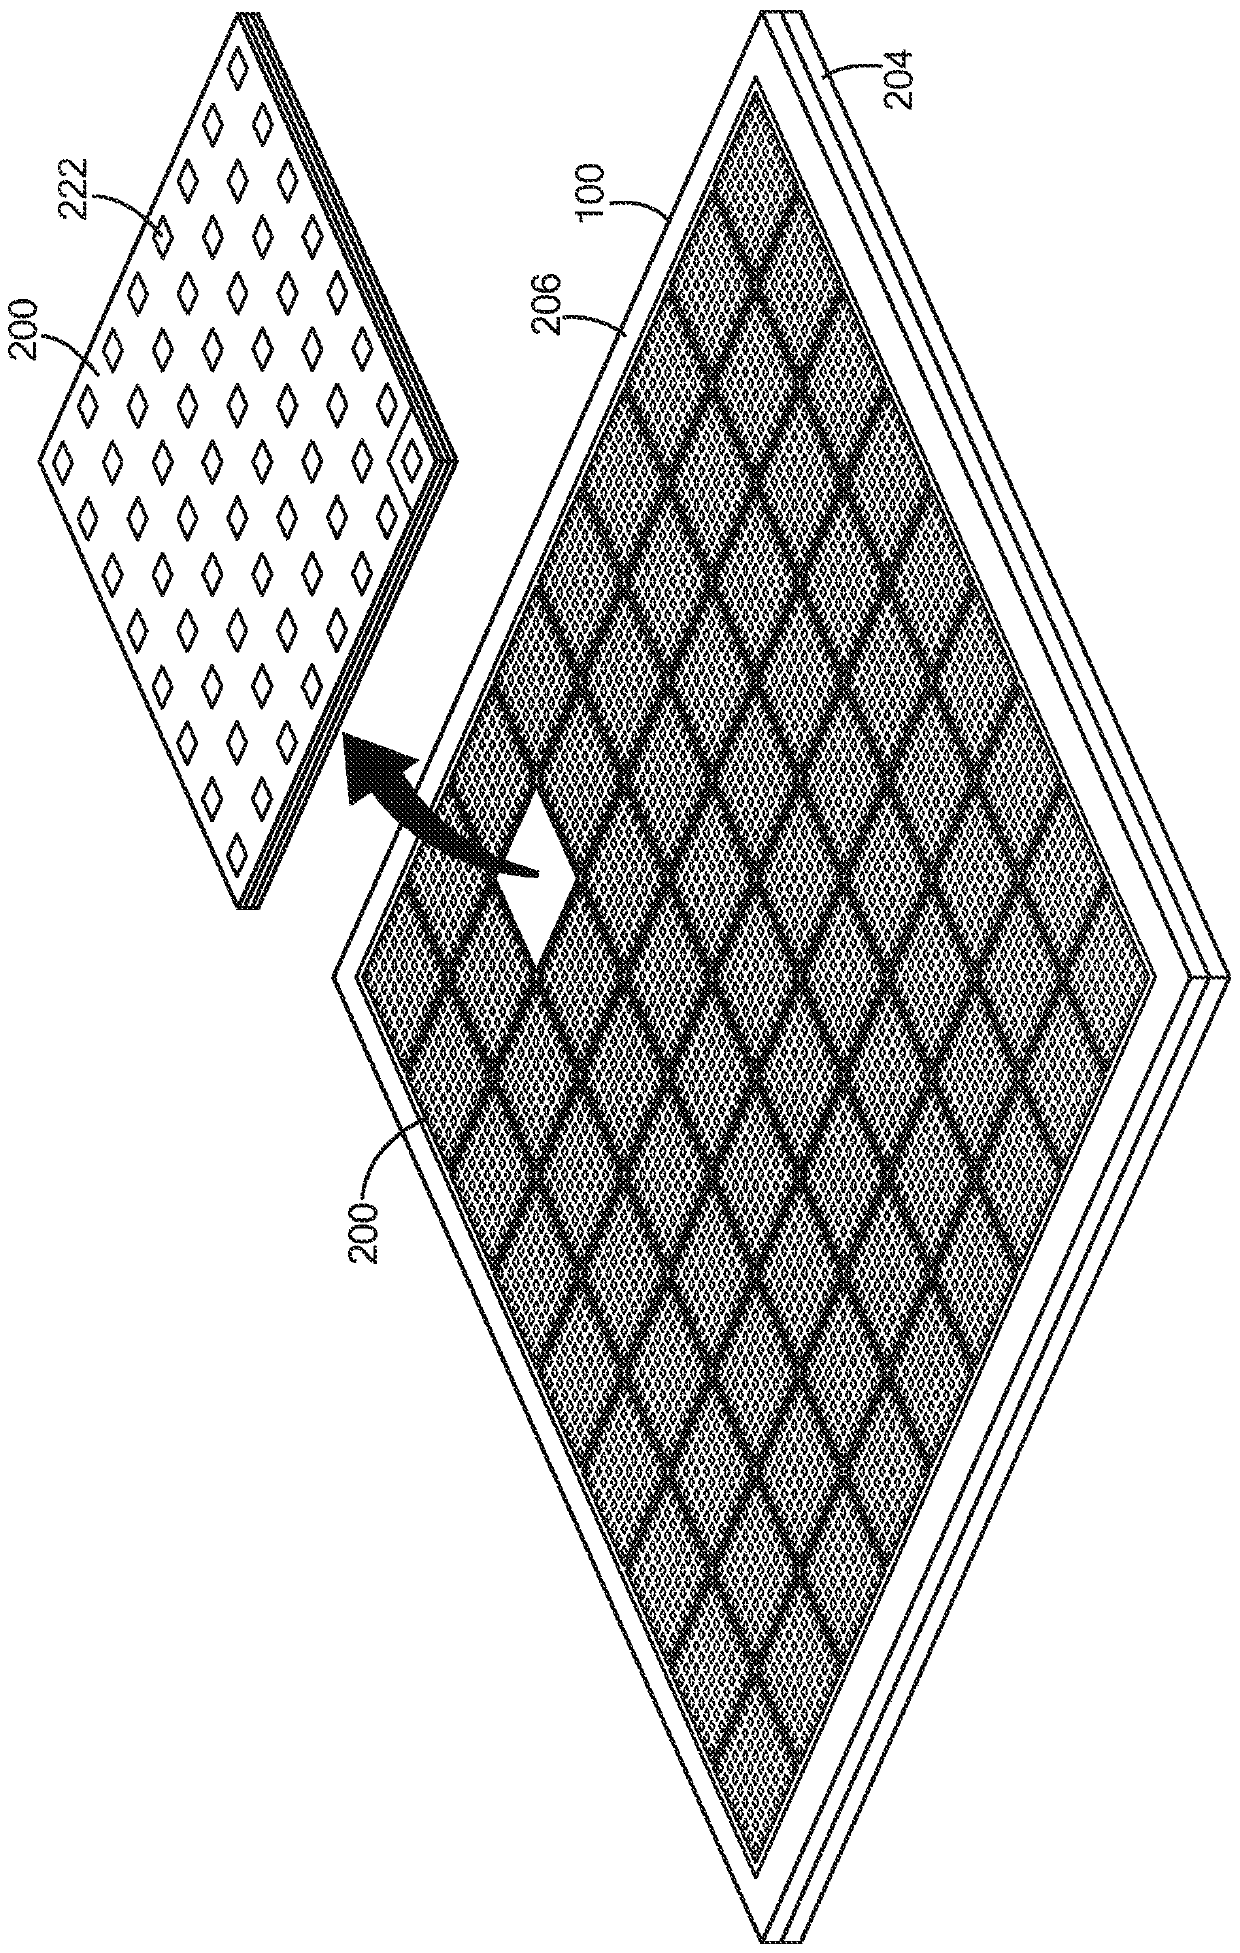 Tile for an active electronically scanned array (AESA)